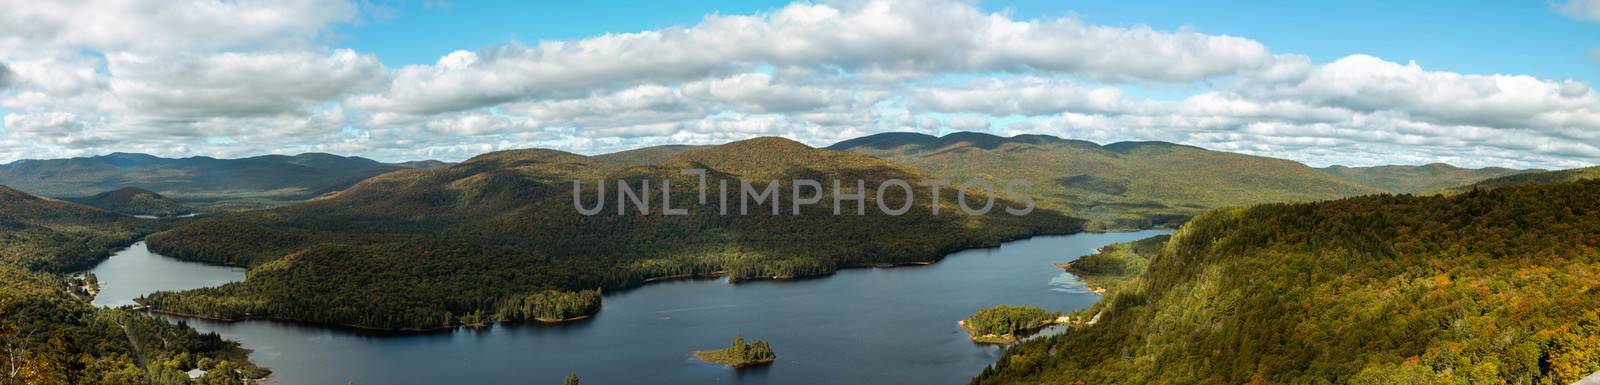 Quebec wilderness: Lac Monroe in Mont-Tremblant national park, Quebec, Canada in summer by mynewturtle1